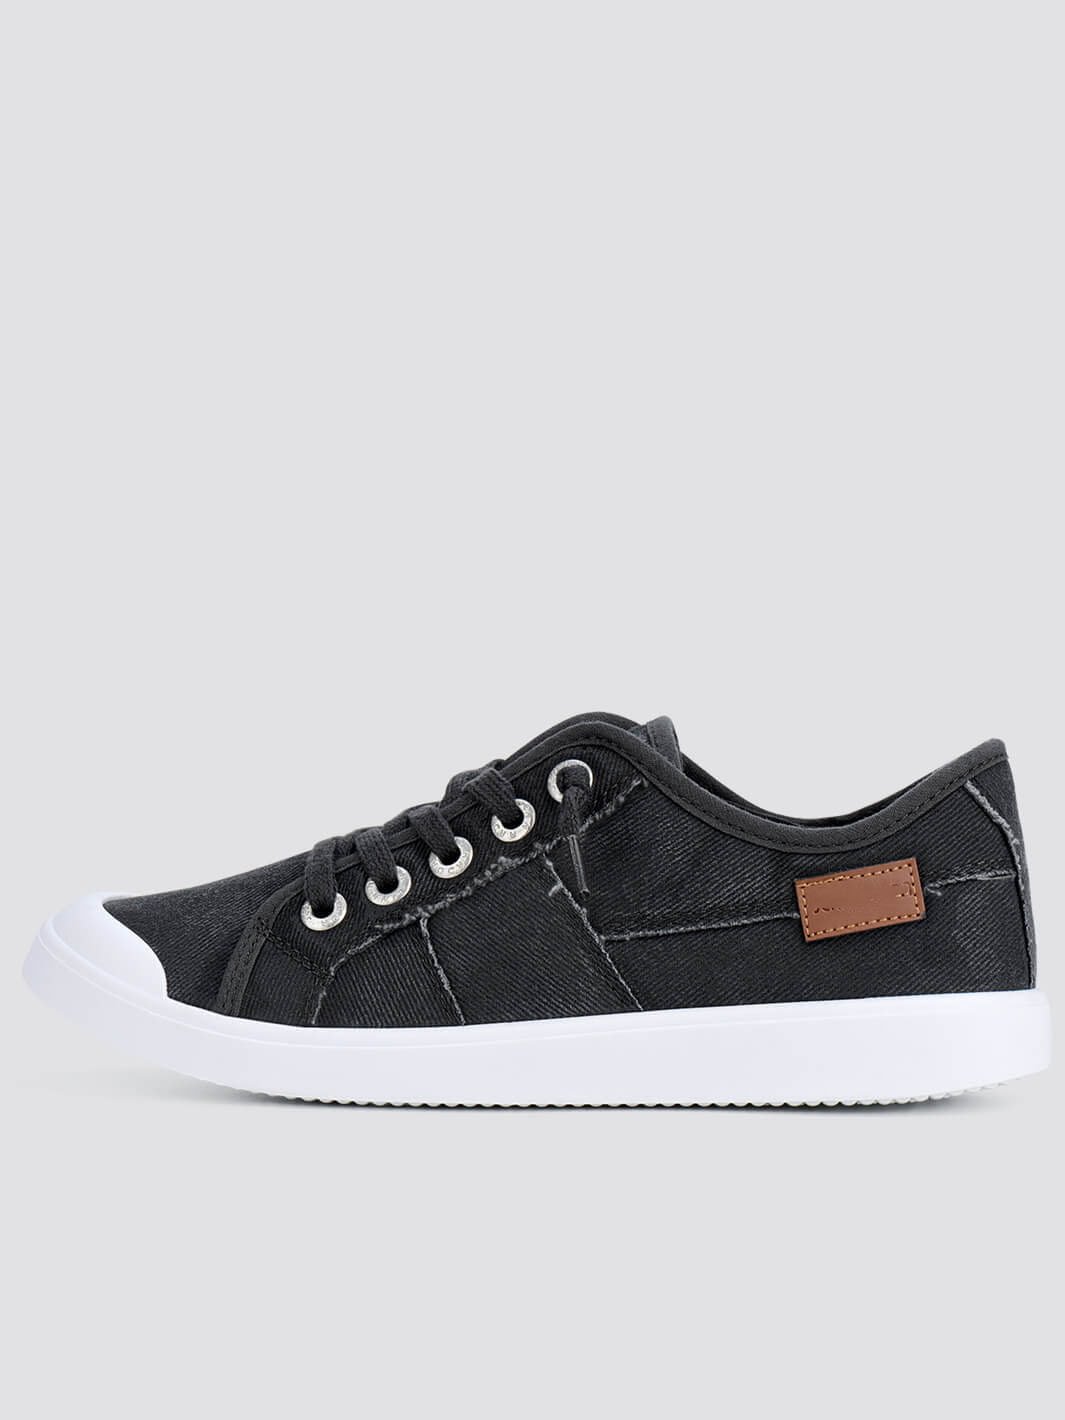 2022 New Arrival Women's Fixed Lace-Up Sneakers